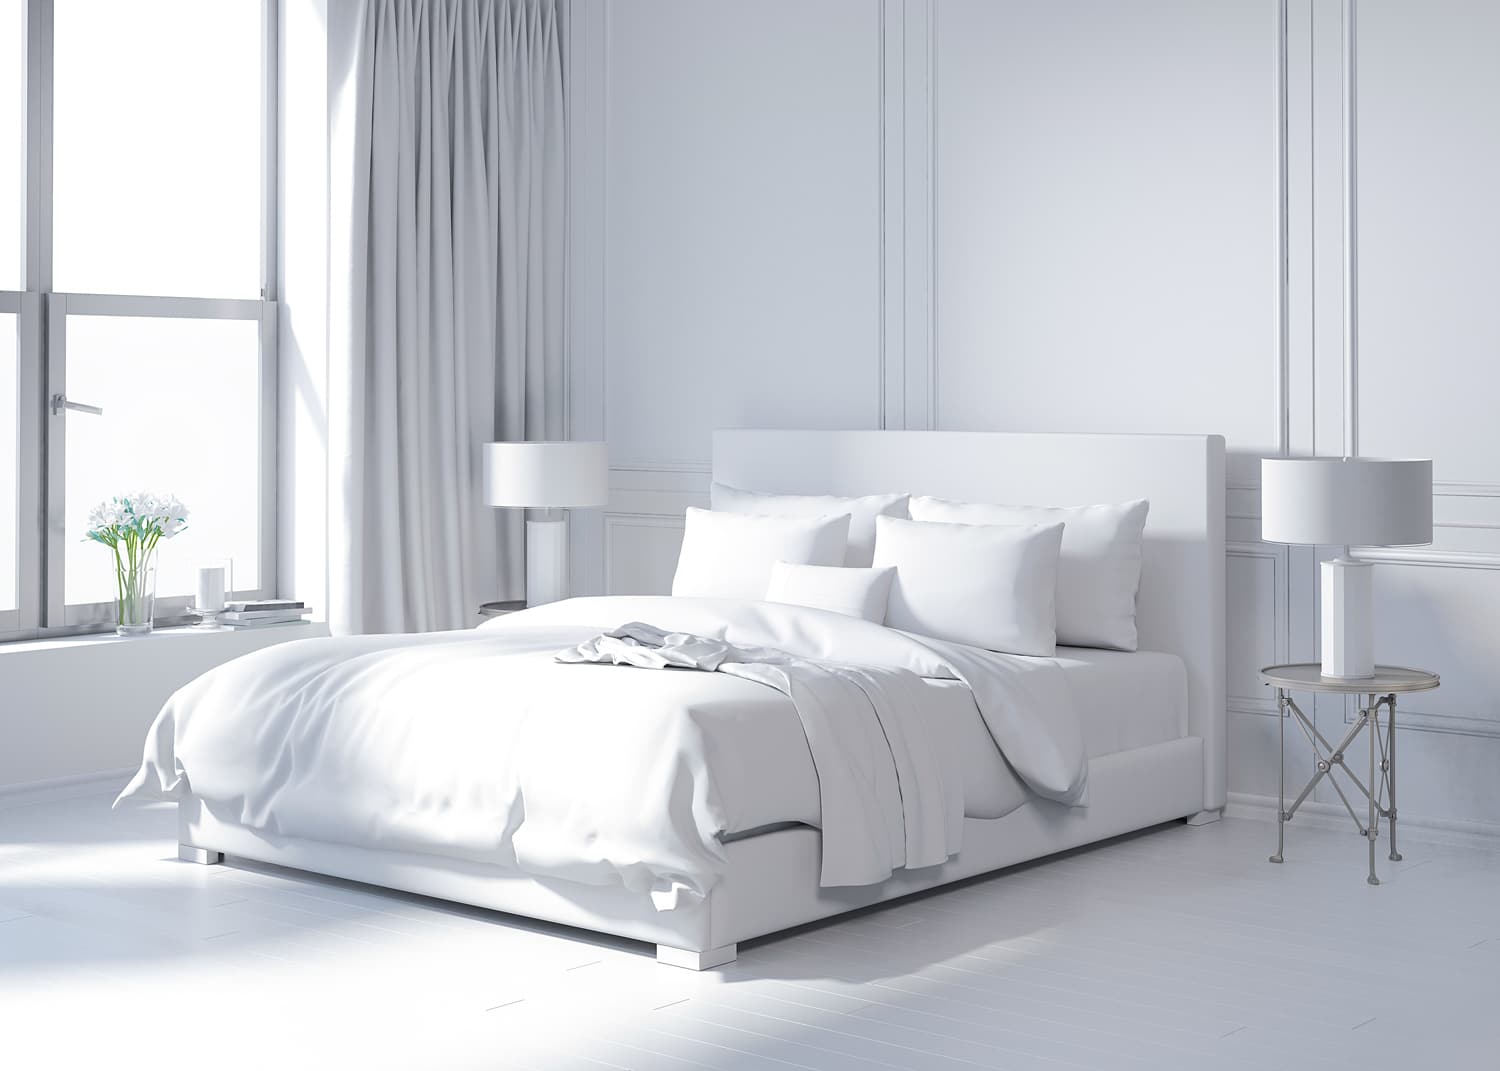 How to choose the right mattress according to your sleeping style